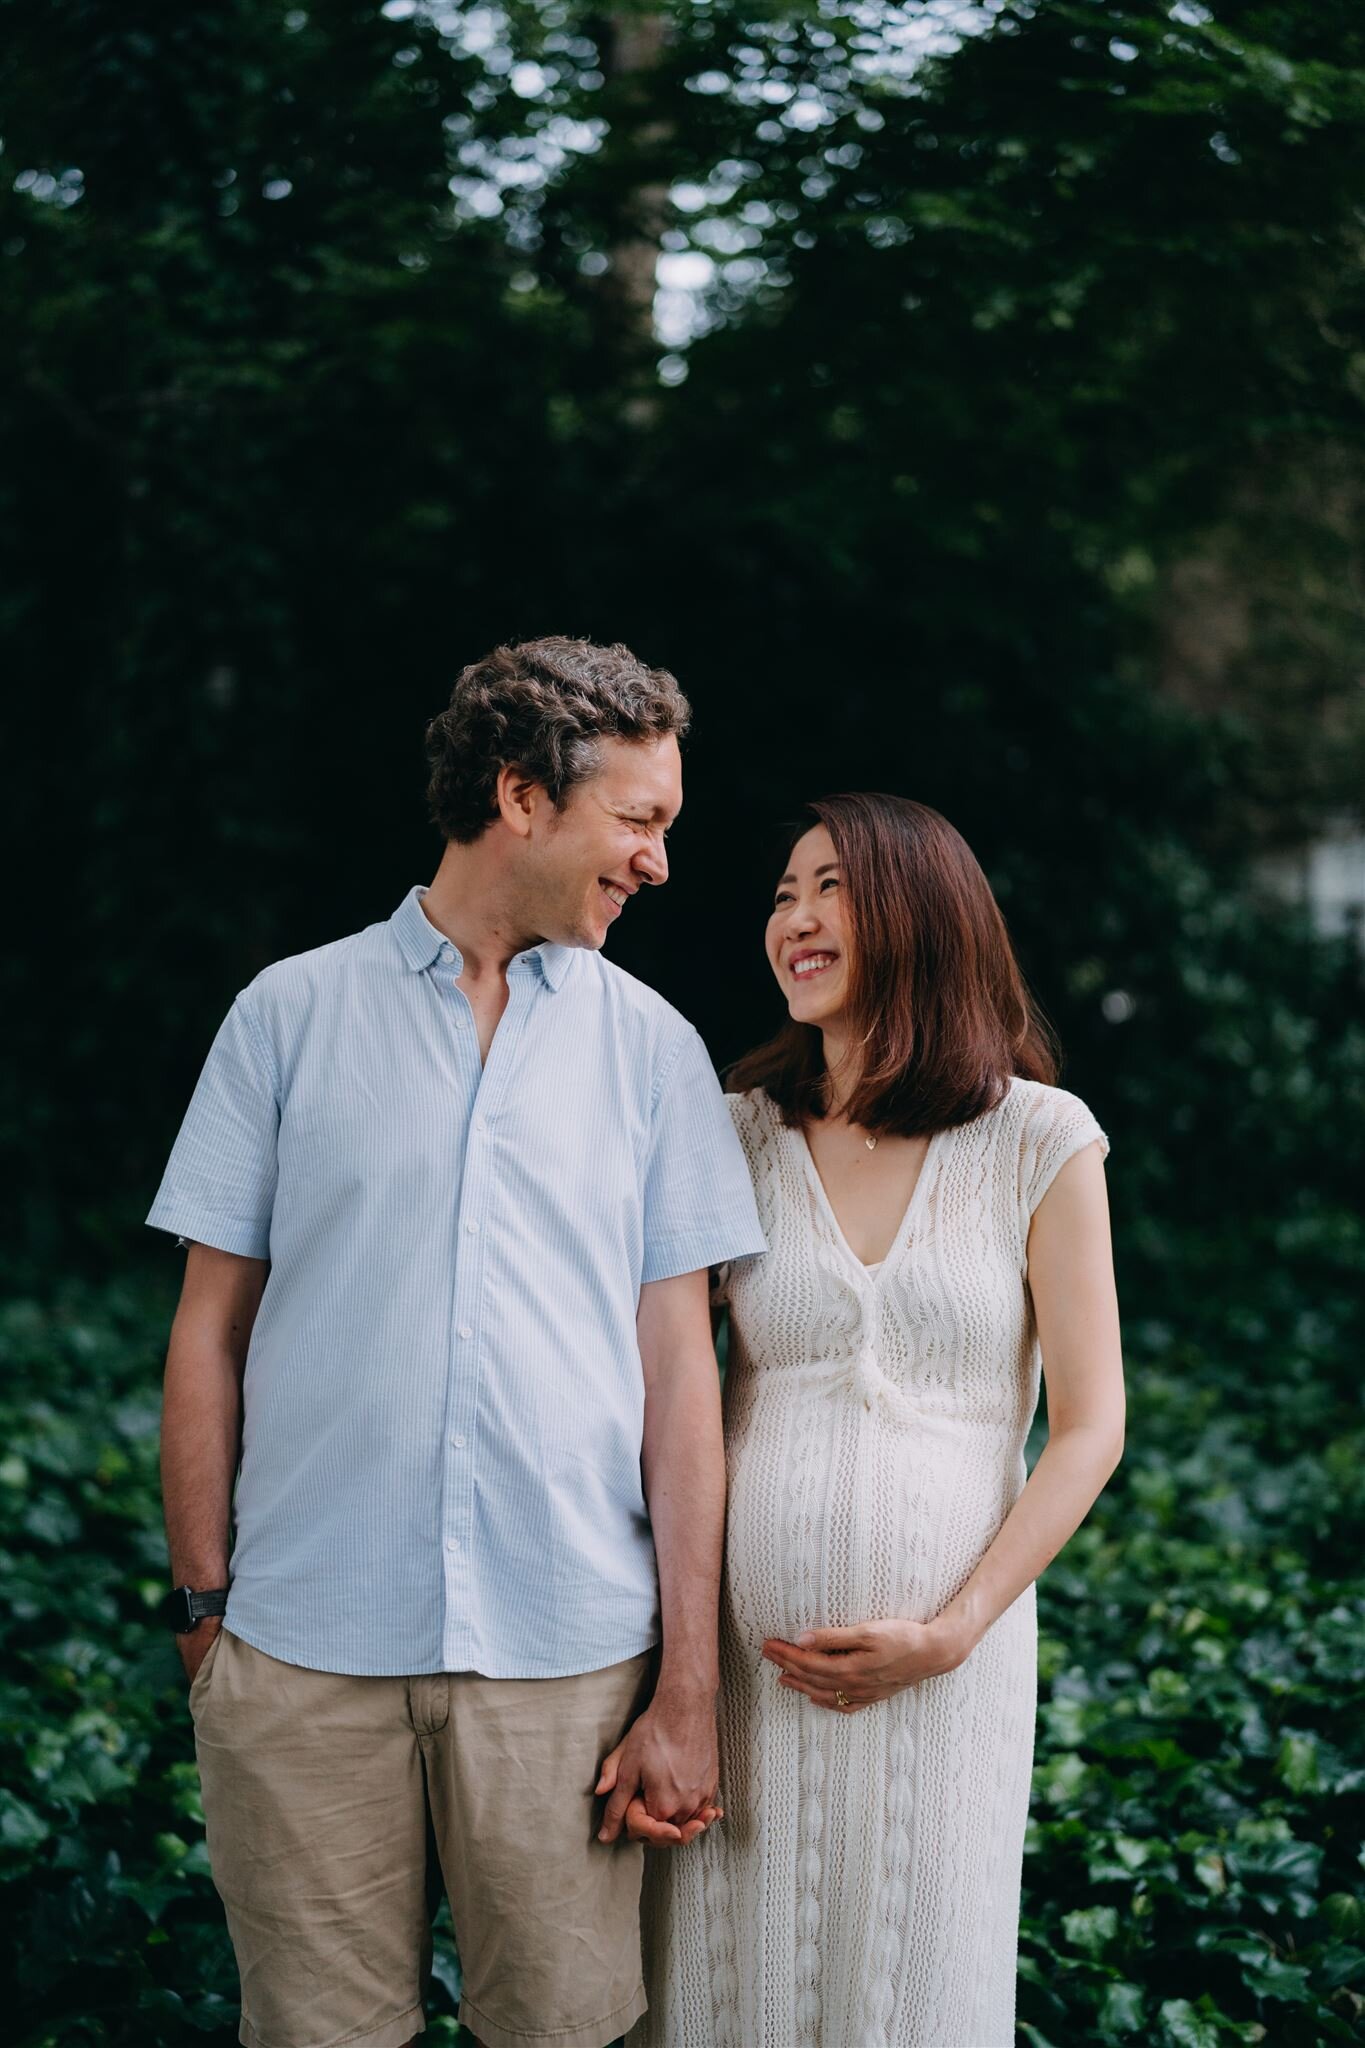 Maternity Portrait Photography in Tokyo | Natural and Fun